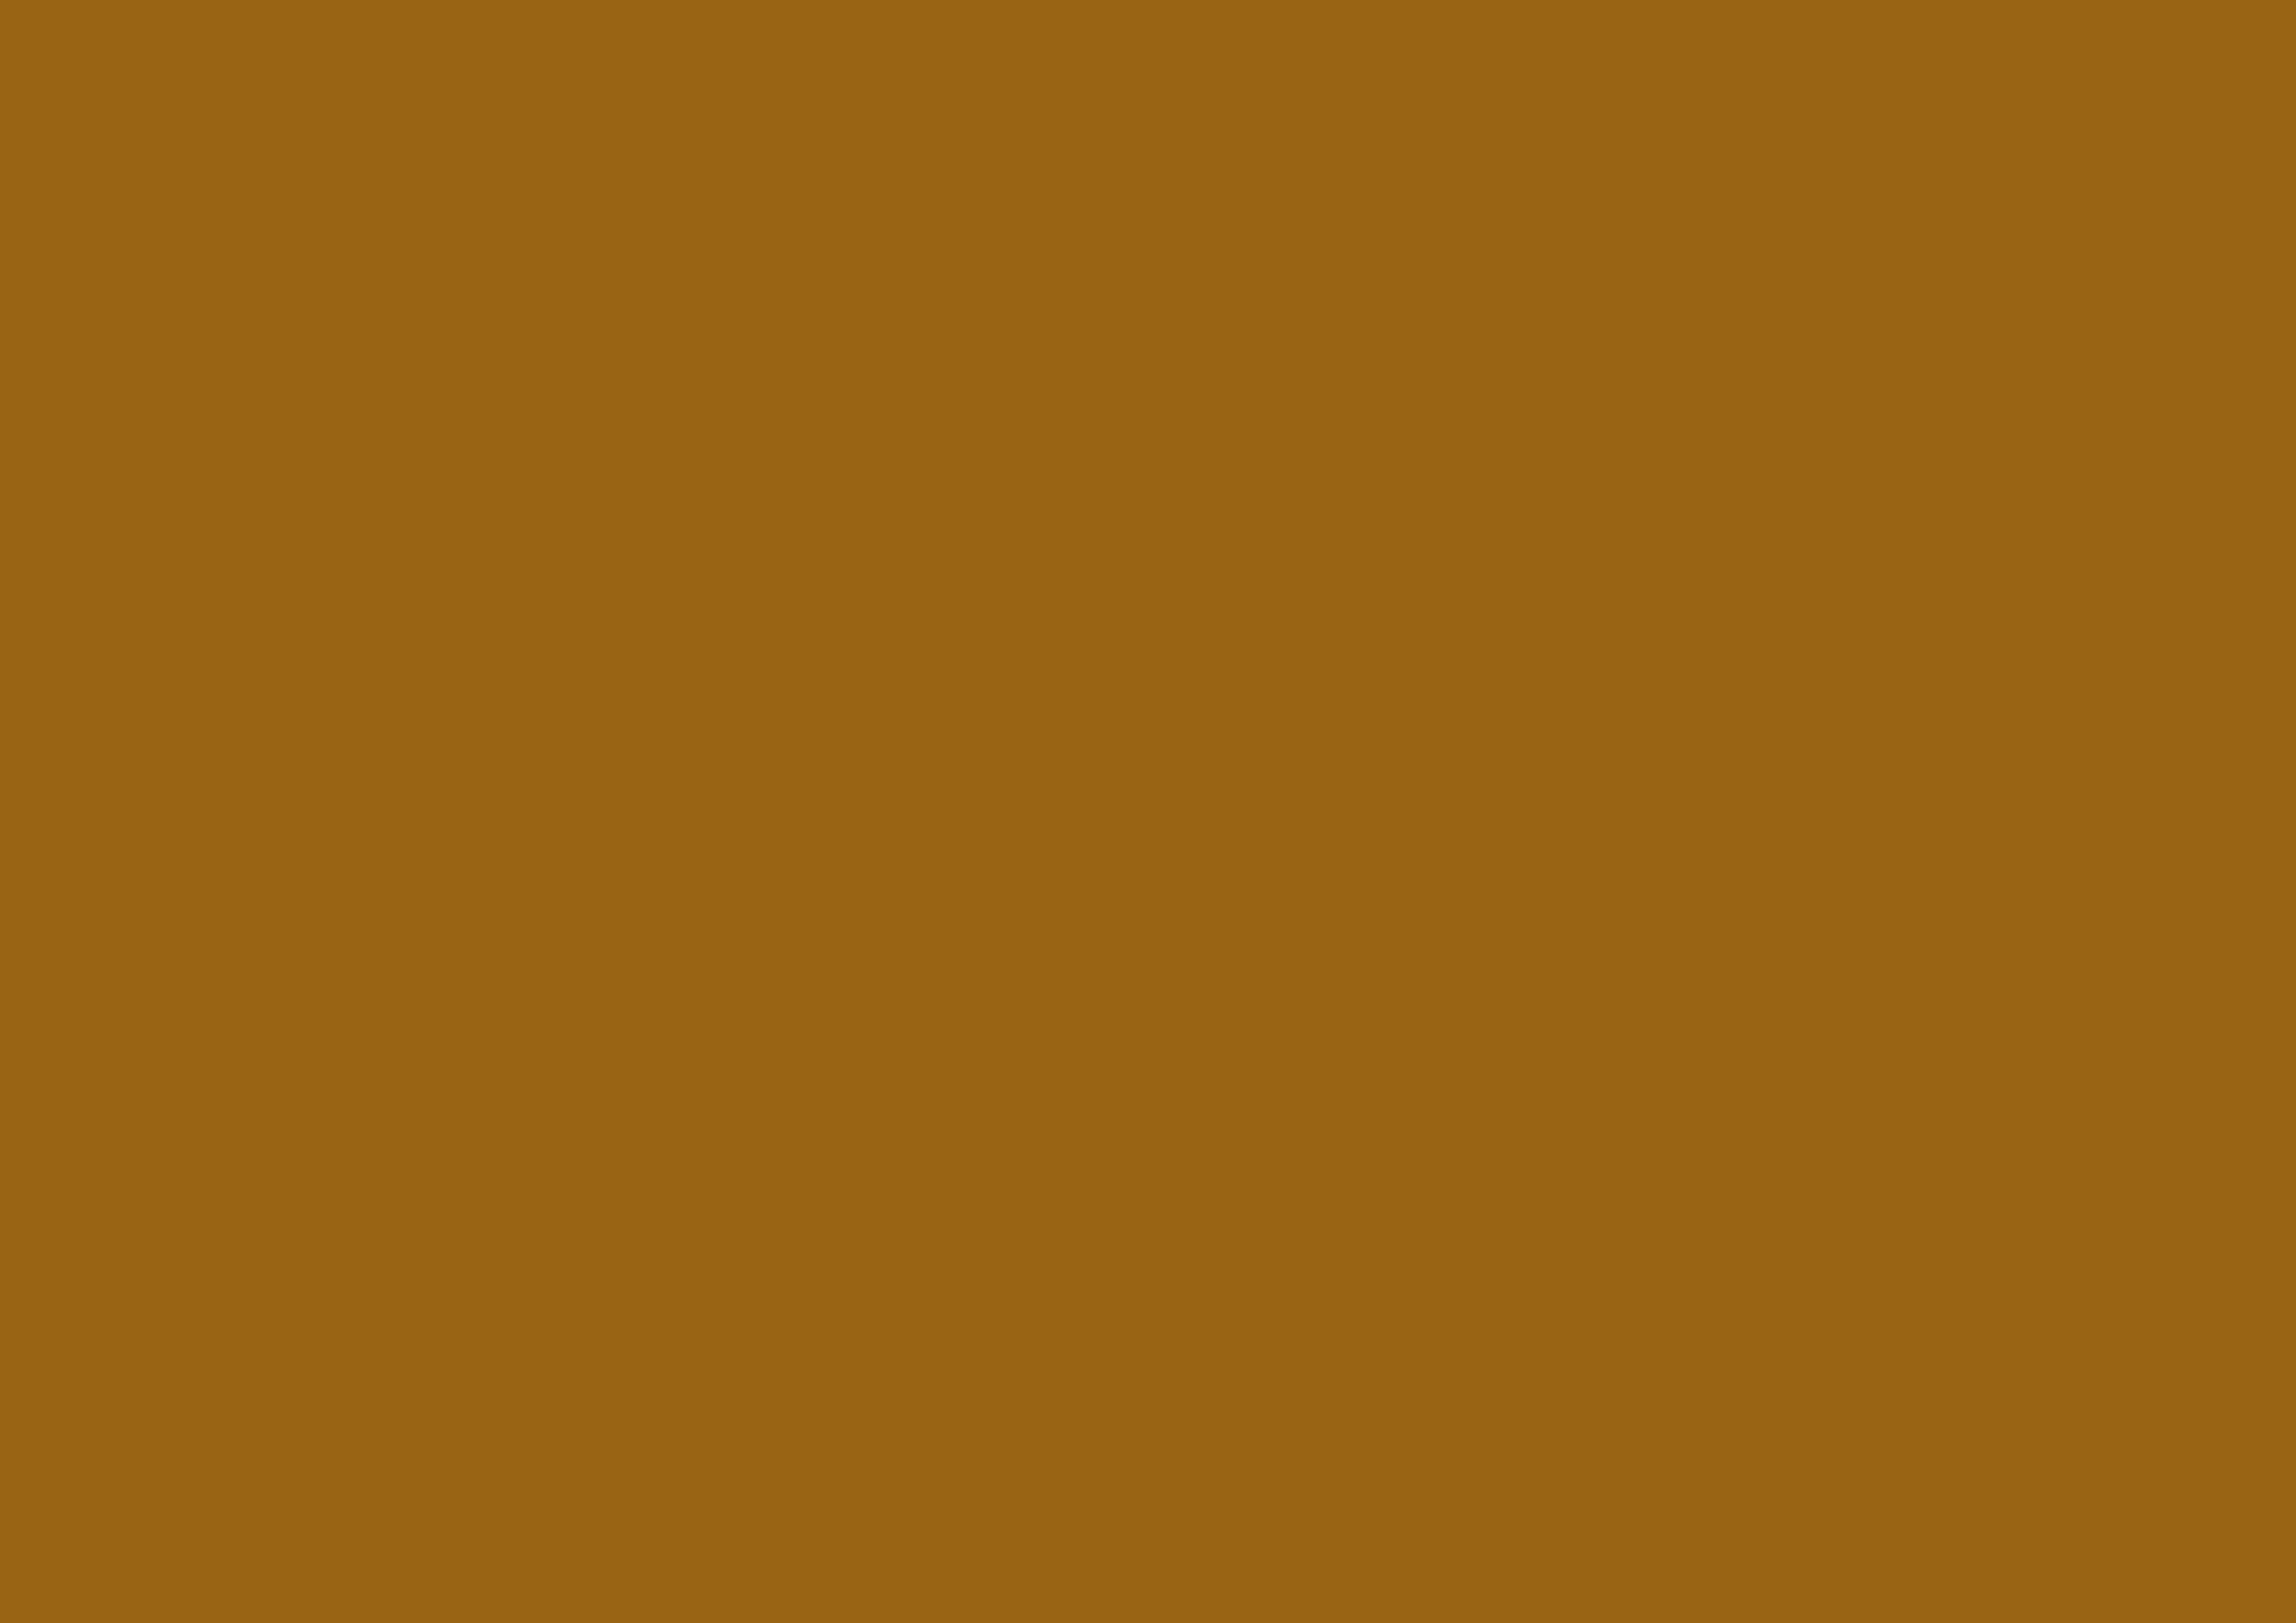 3508x2480 Golden Brown Solid Color Background